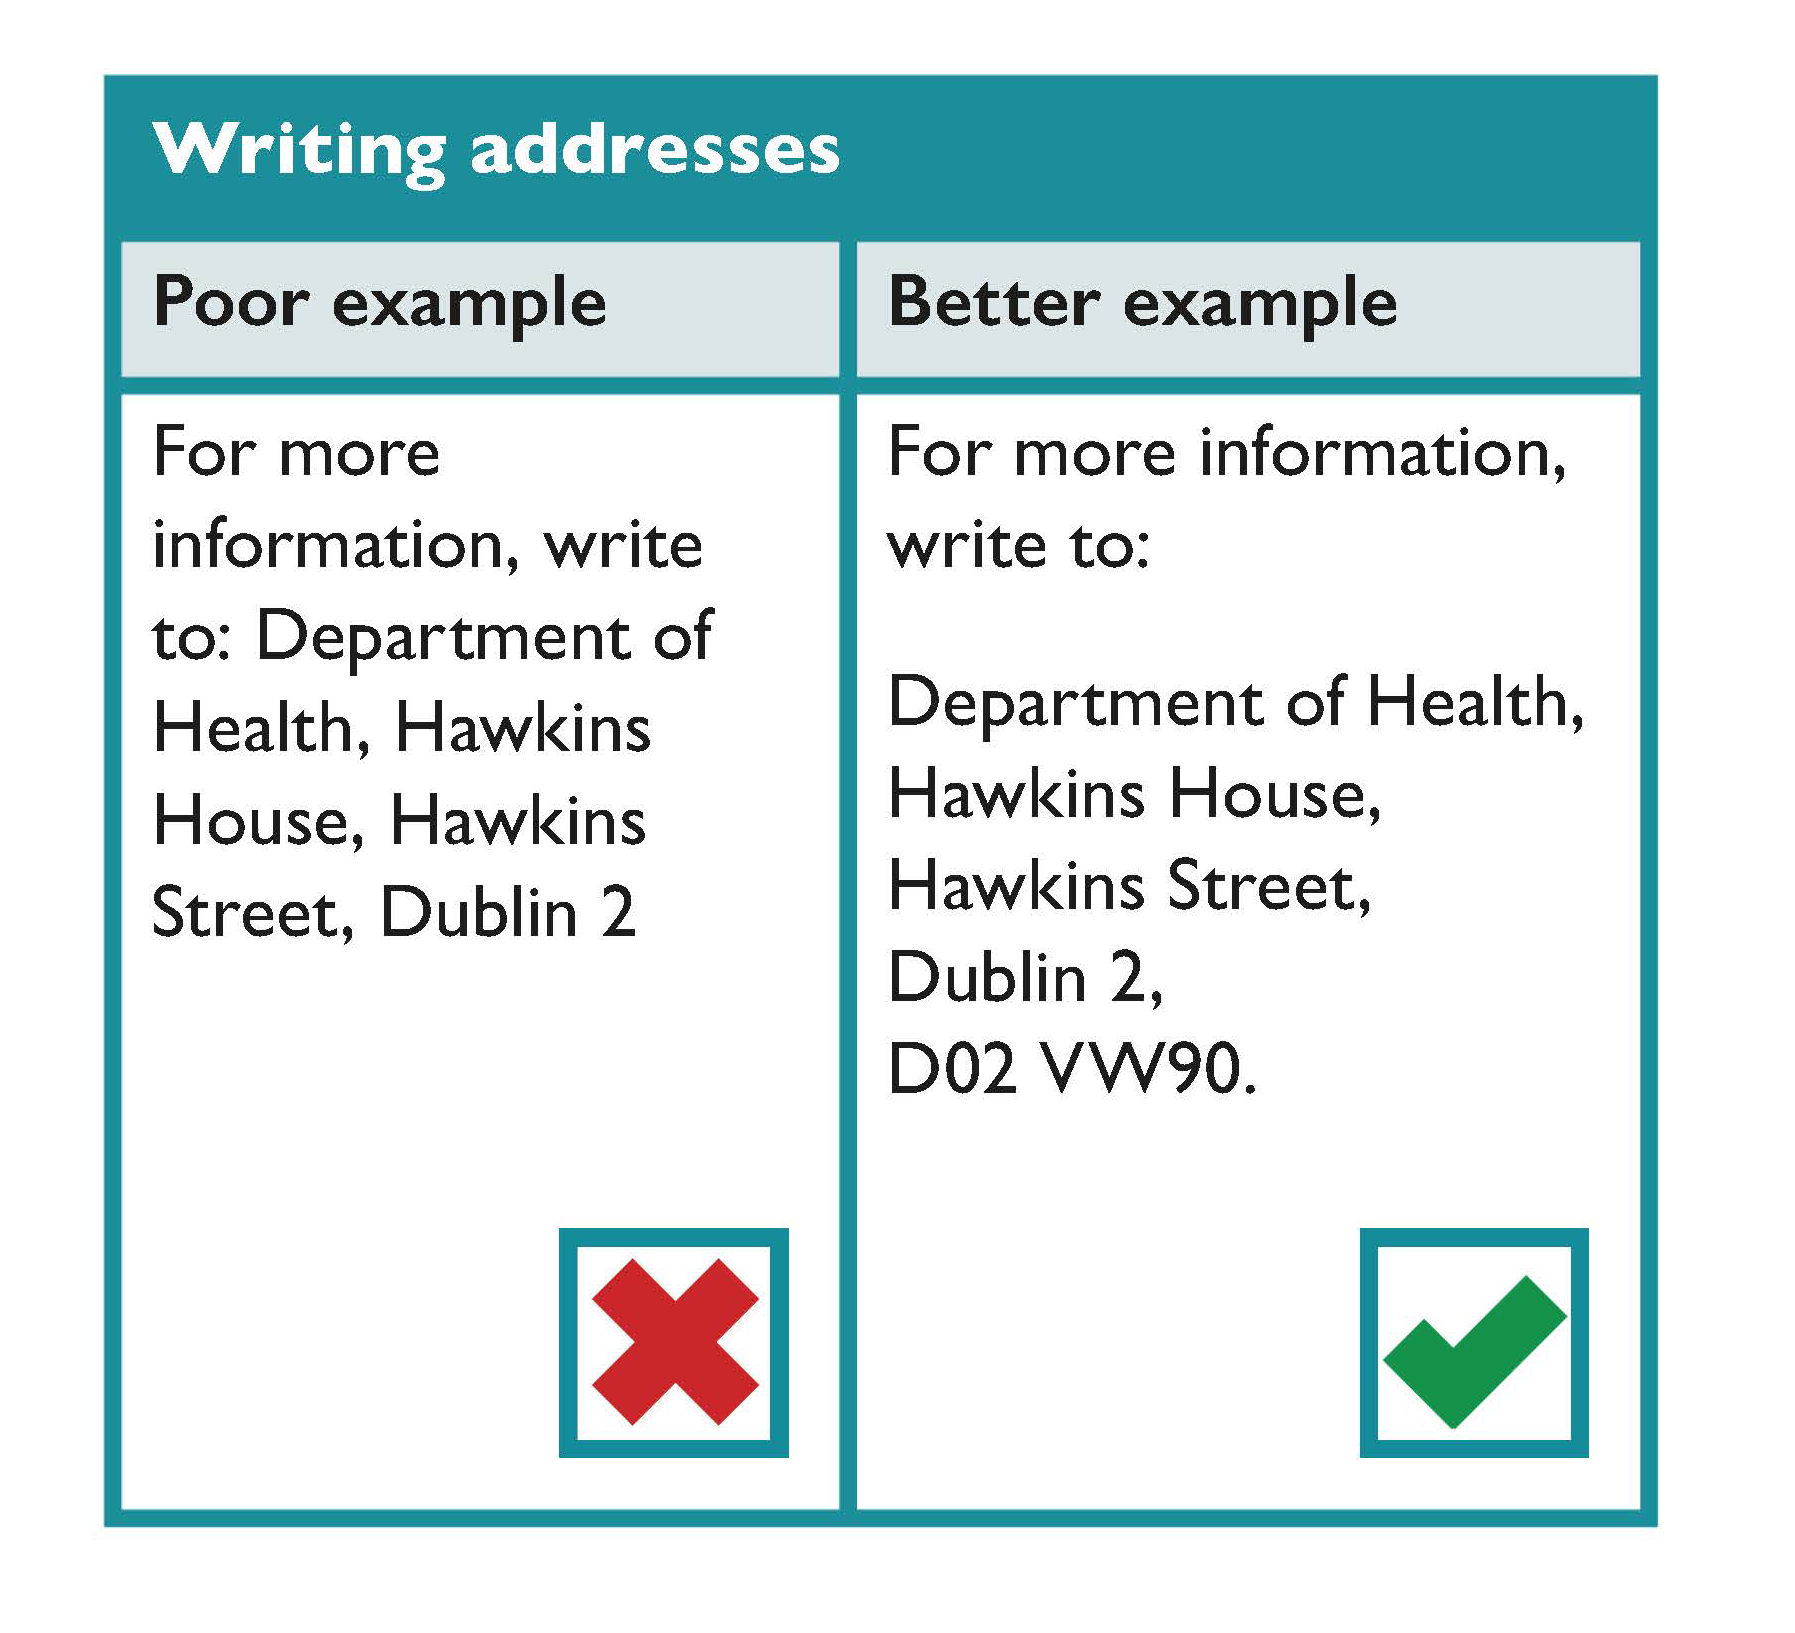 Examples of how to write addresses